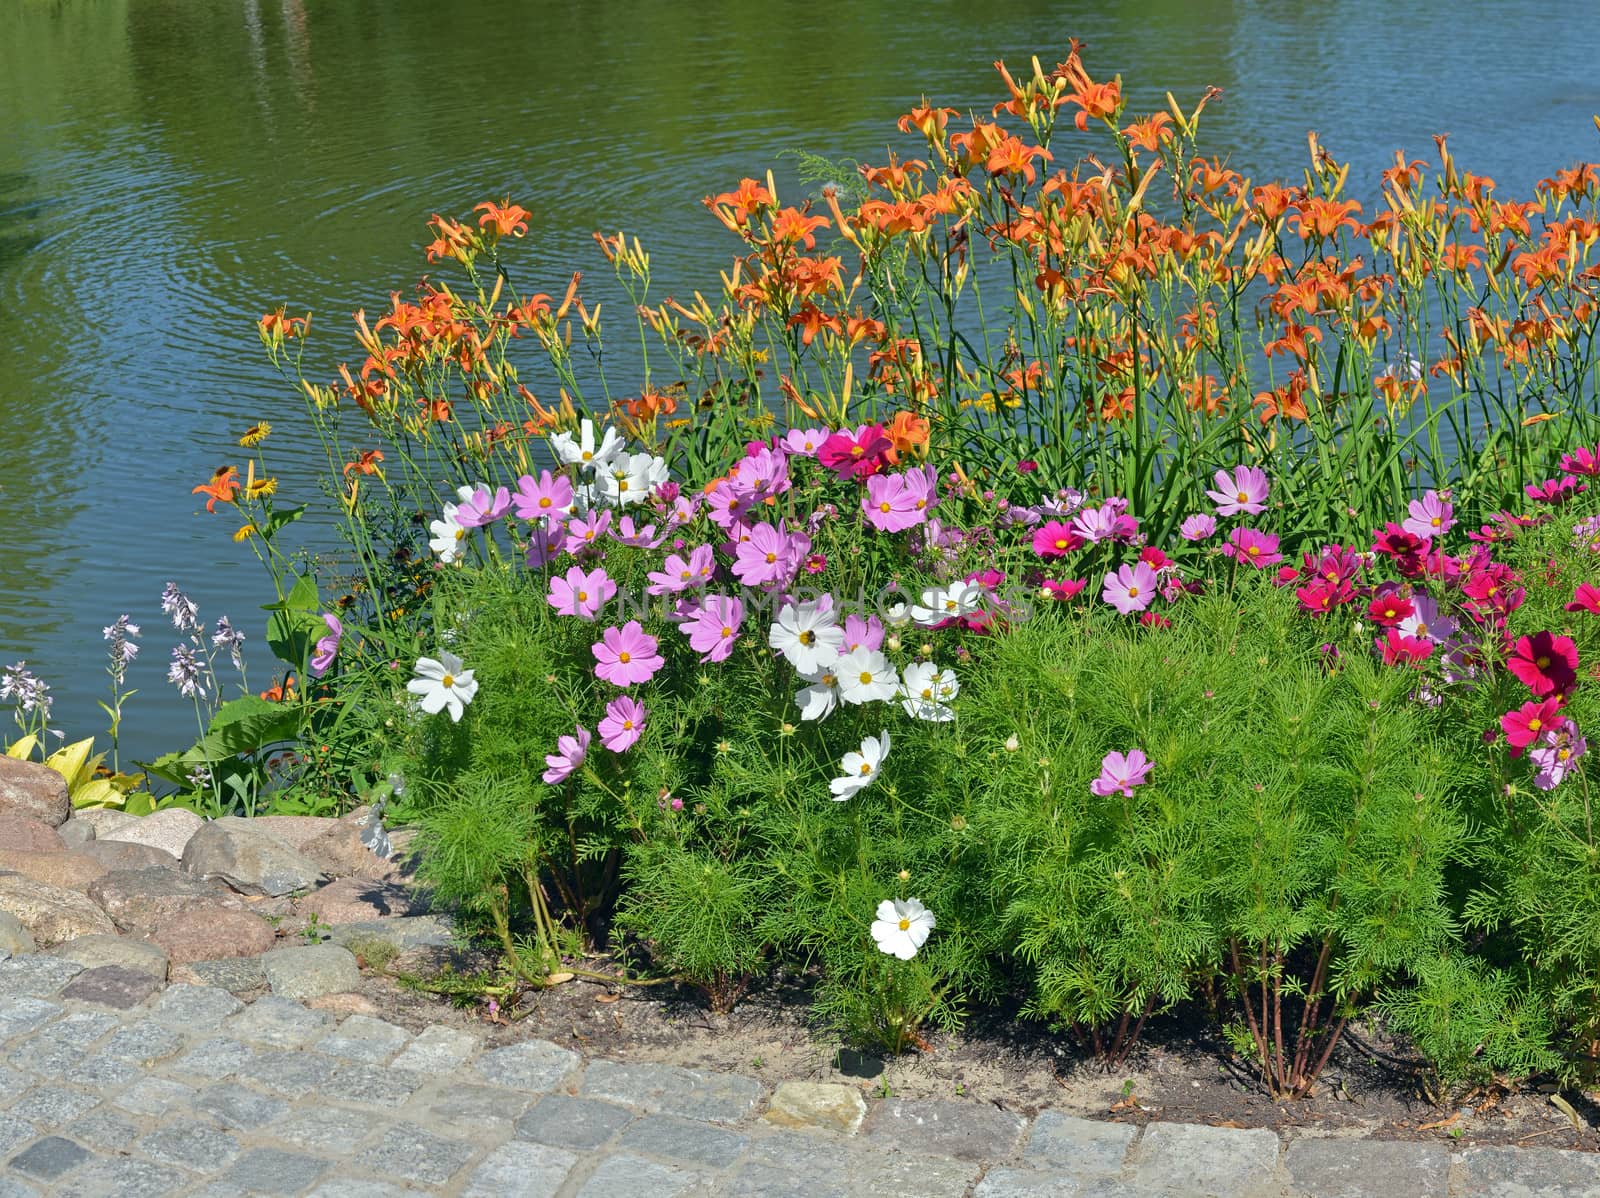 Blooming flowers on the coast of small lake.